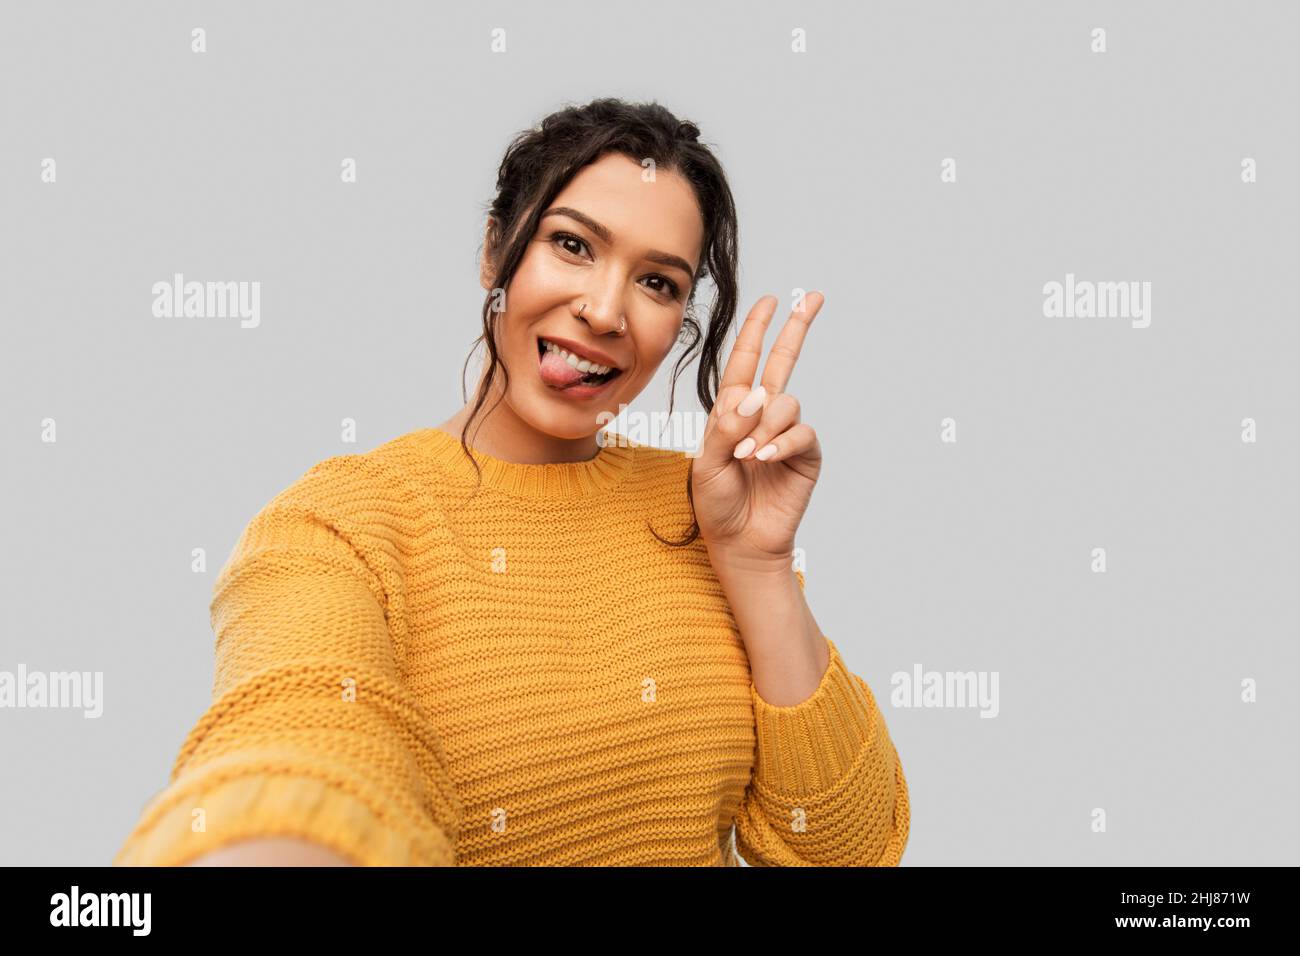 woman with pierced nose taking selfie shows peace Stock Photo